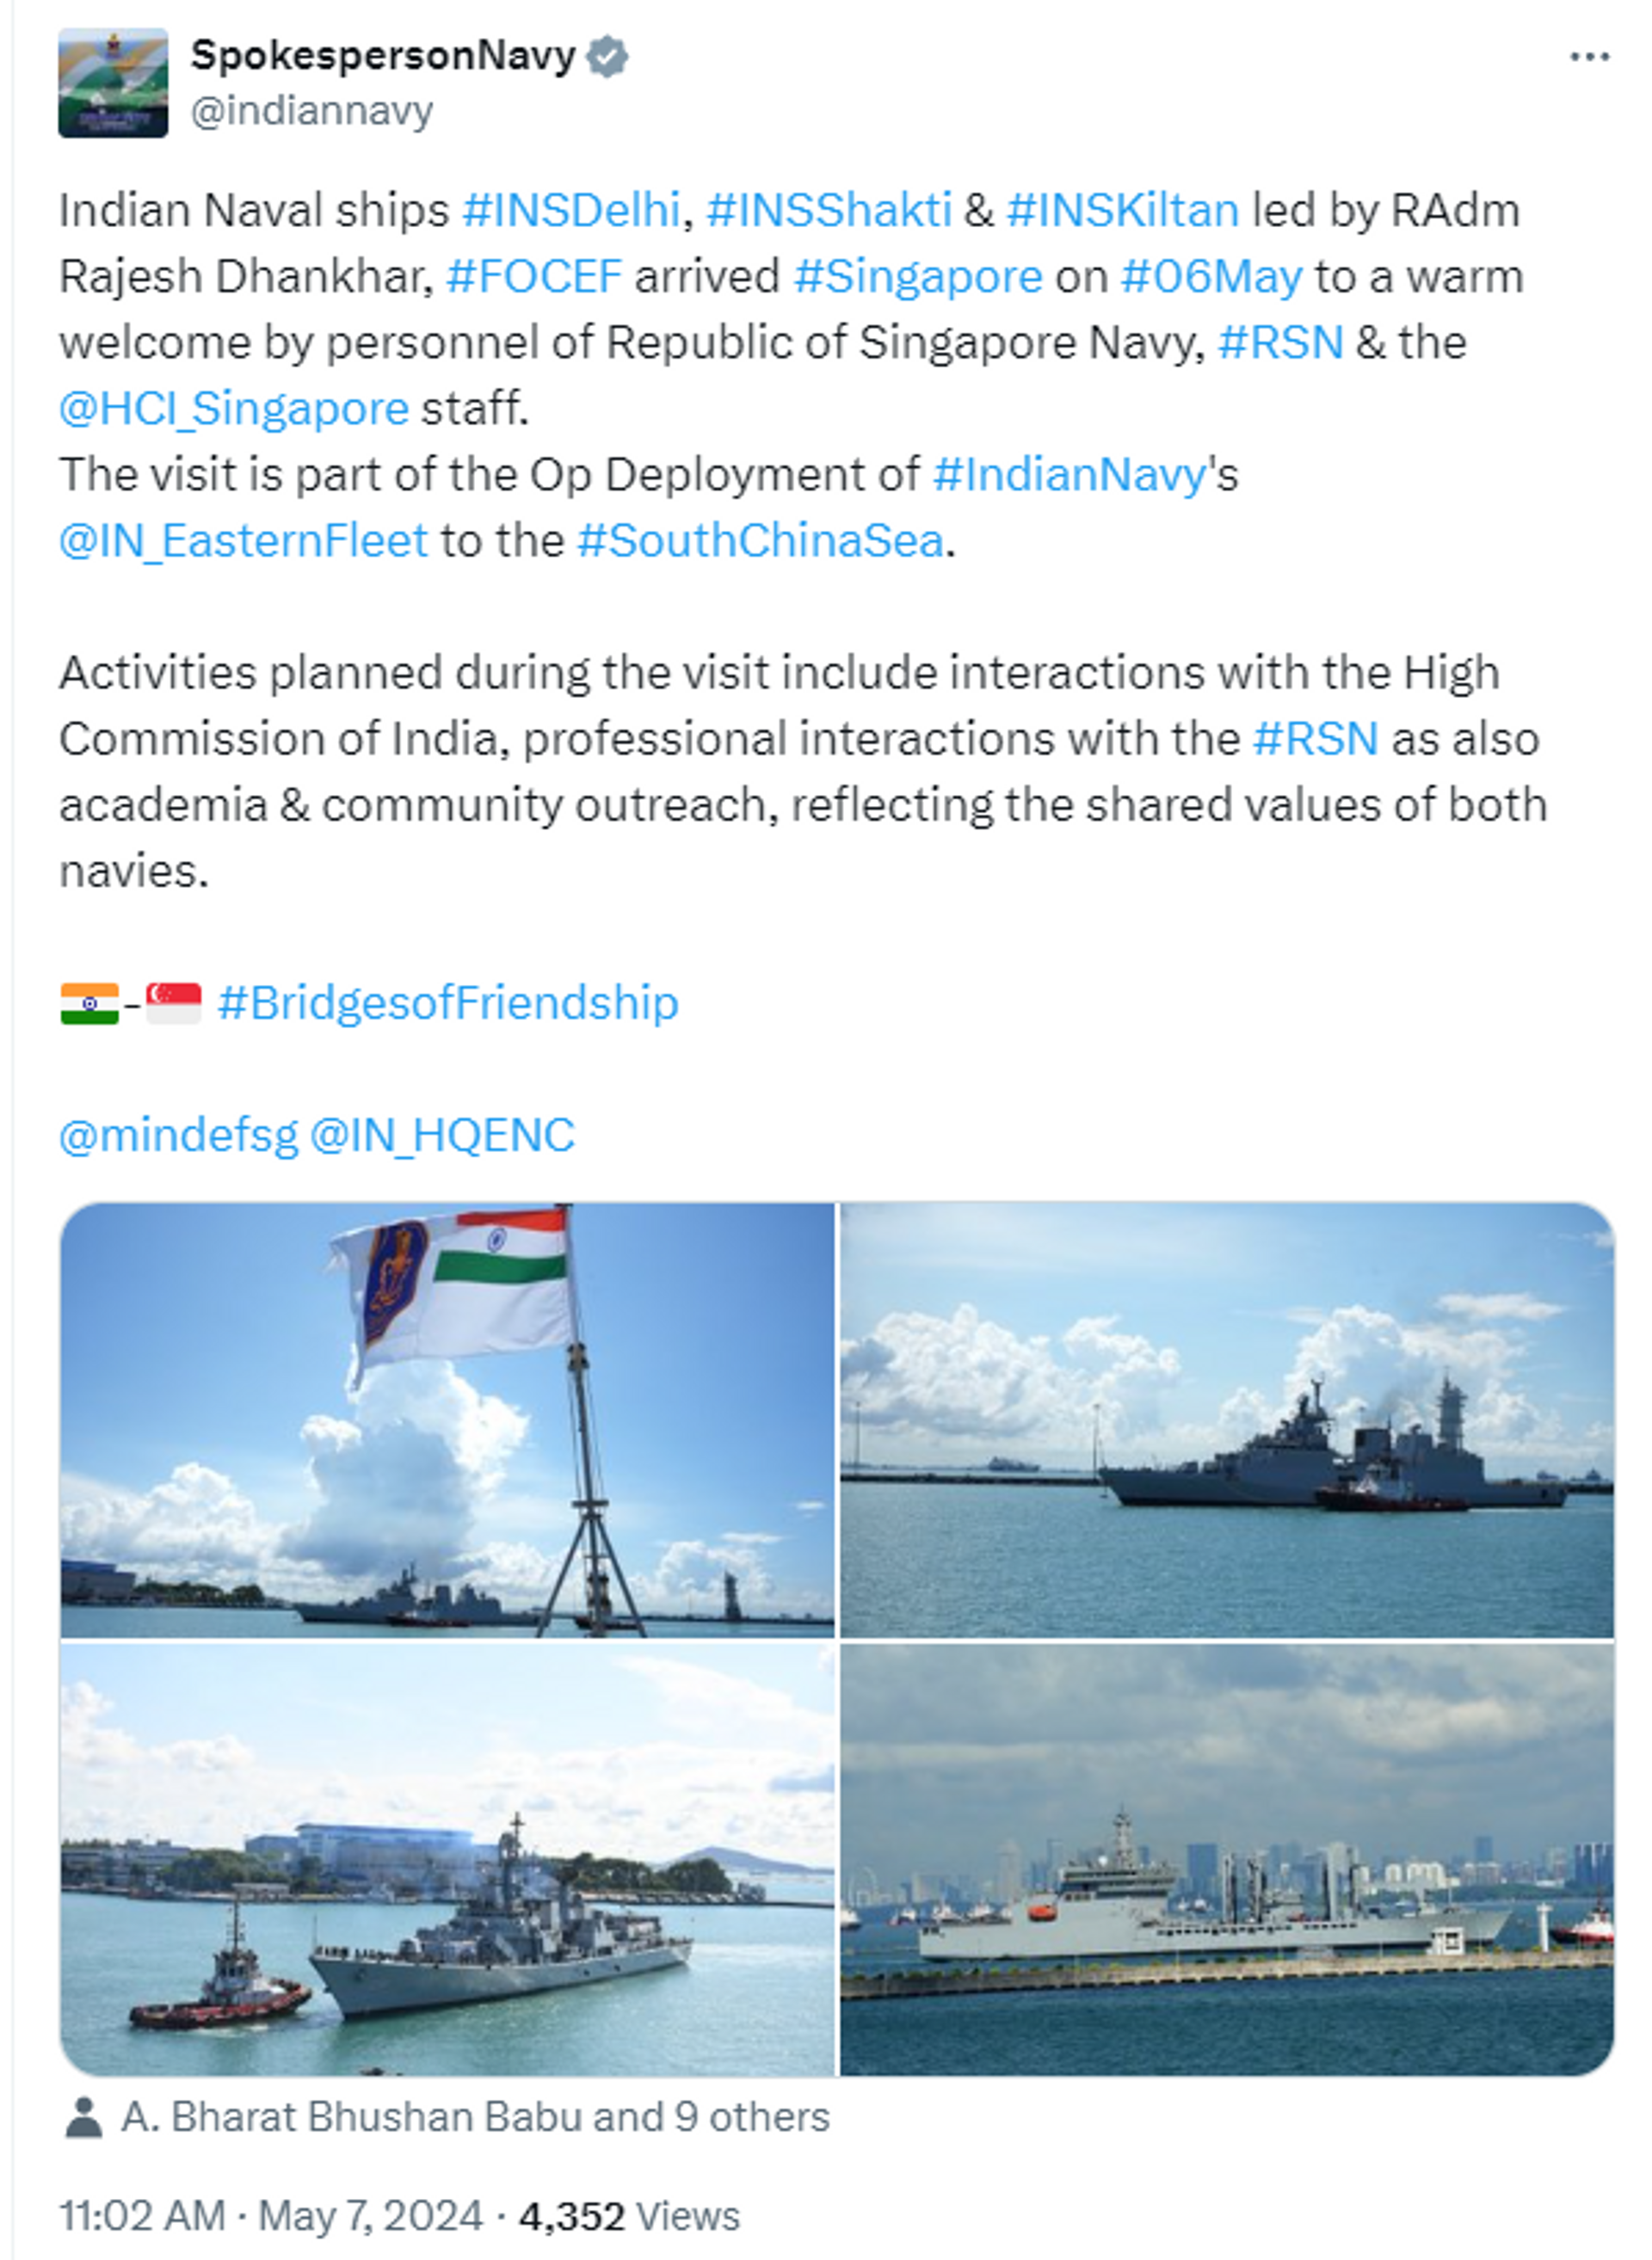 Indian Navy Ships Reach Singapore for Eastern Fleet Deployment in South China Sea - Sputnik India, 1920, 07.05.2024